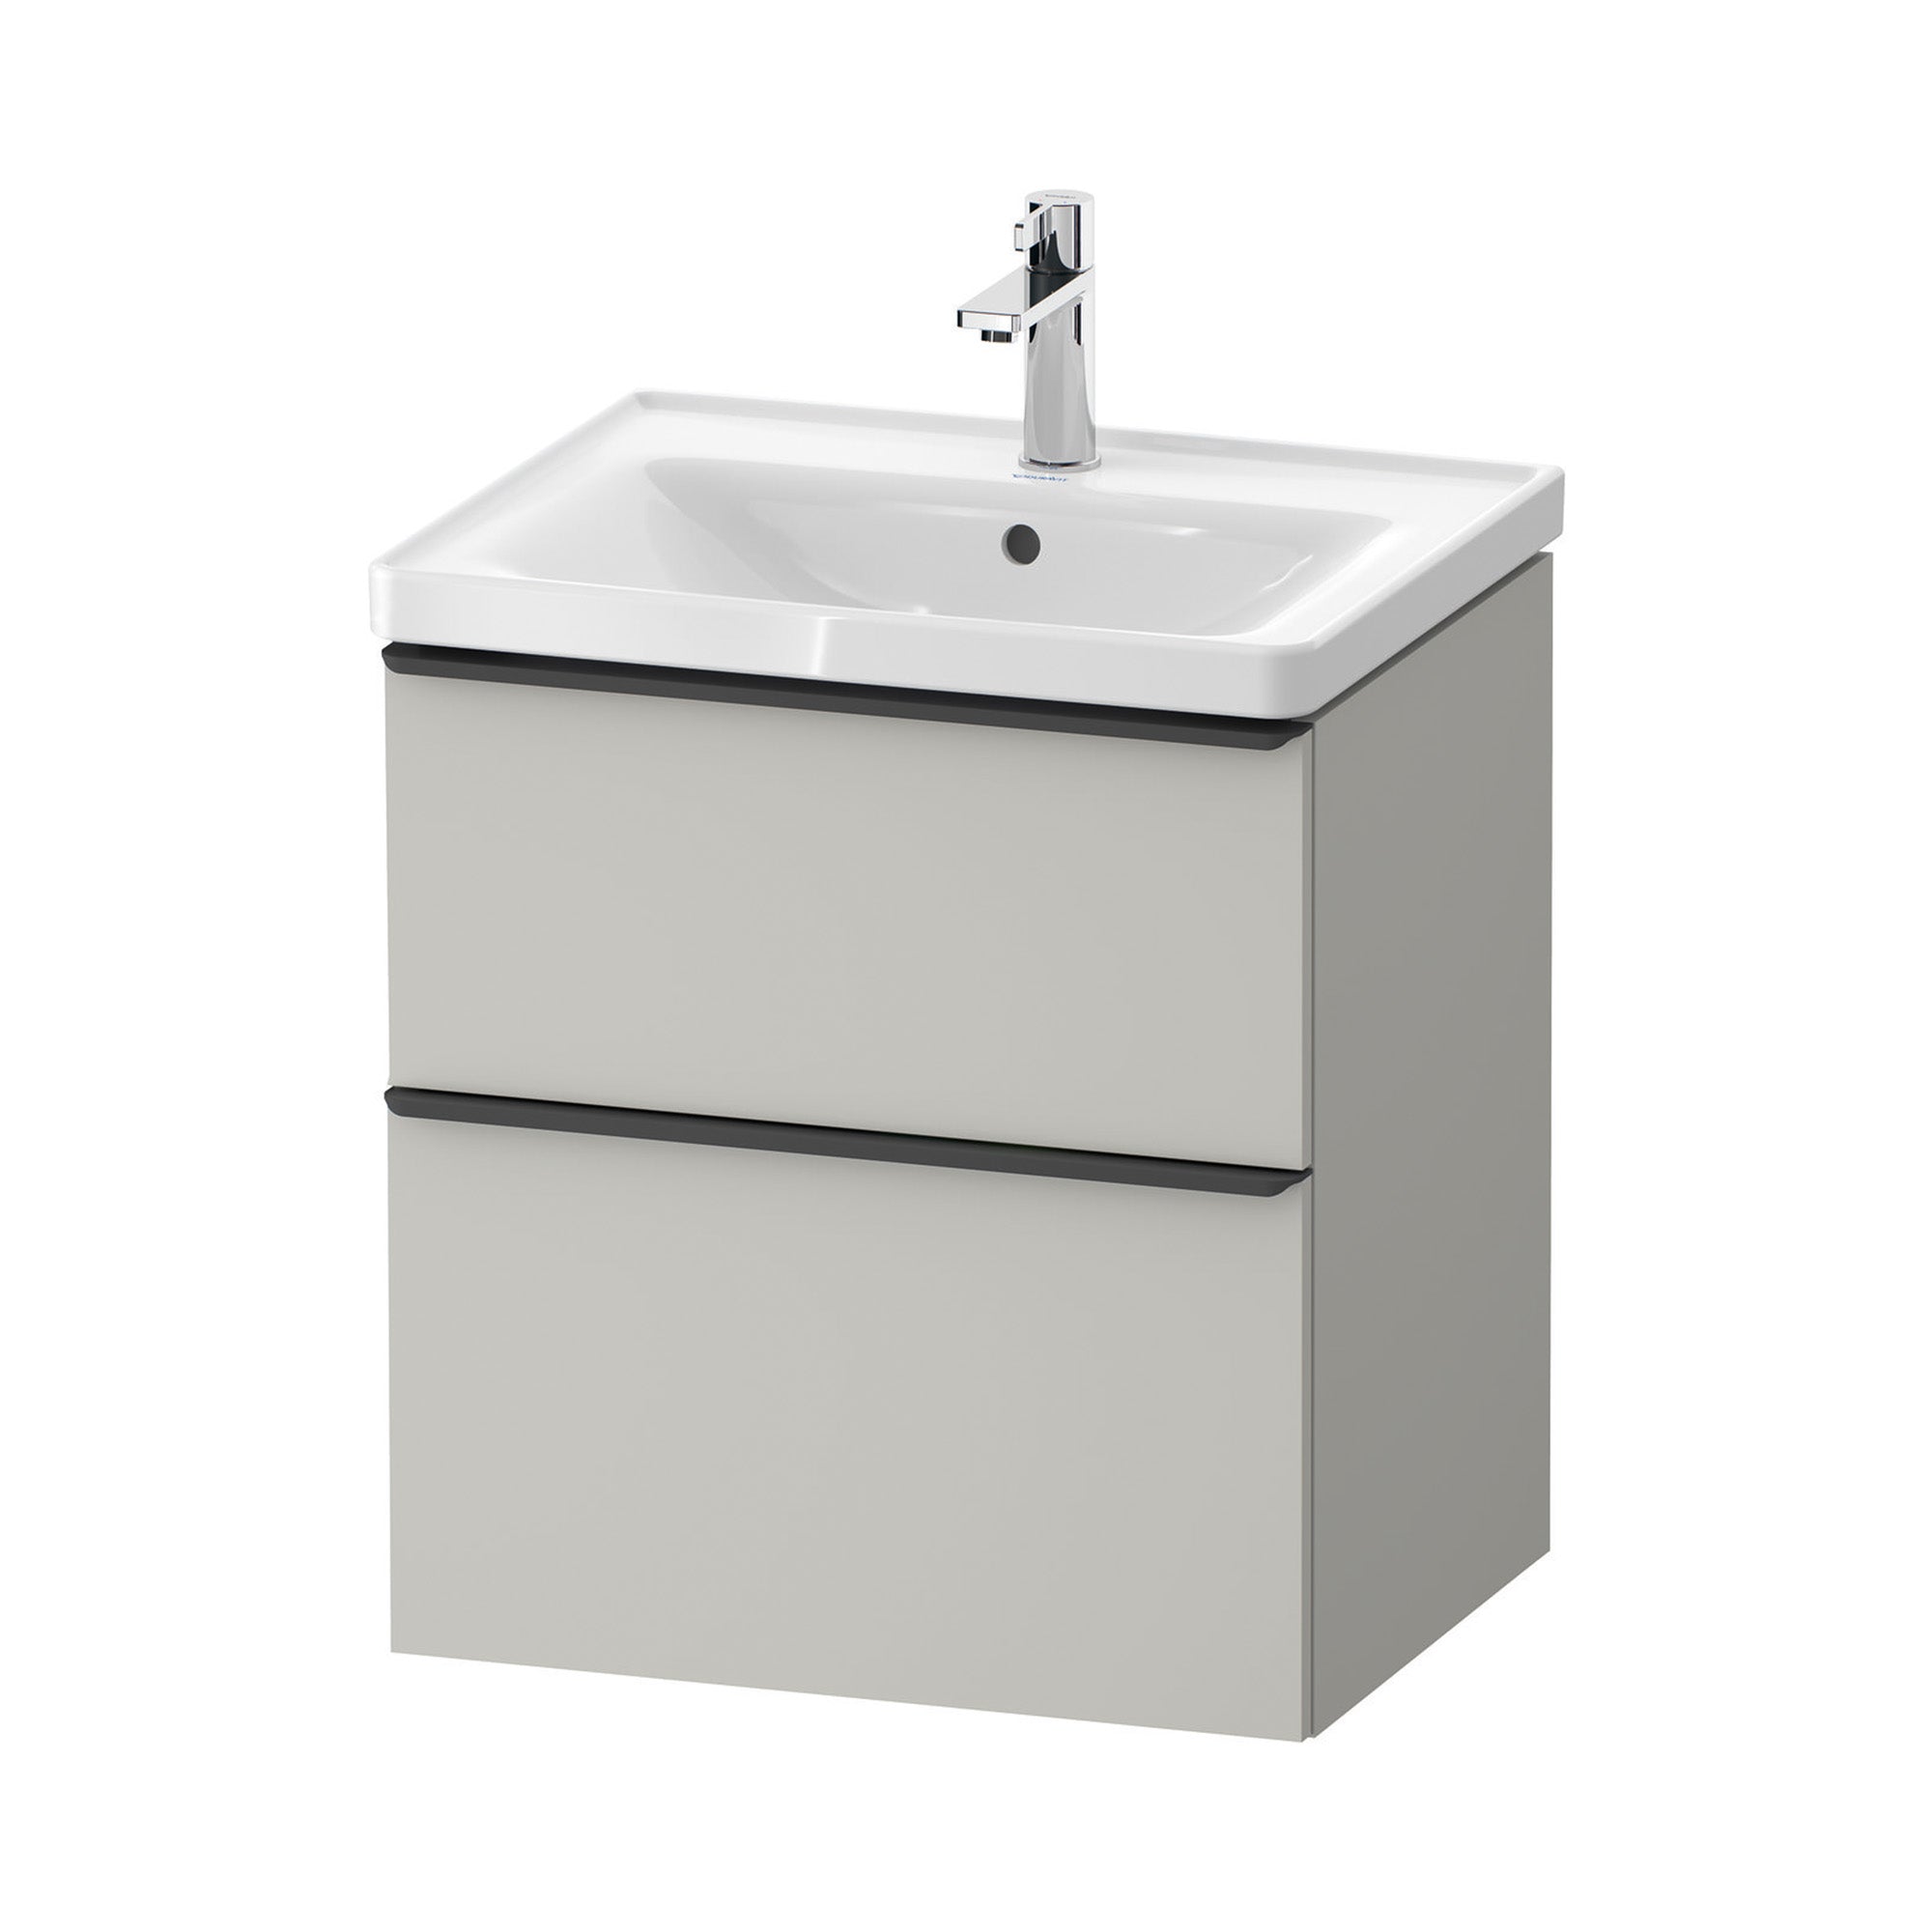 duravit d-neo 600 wall mounted vanity unit with d-neo basin concrete grey diamond black handles